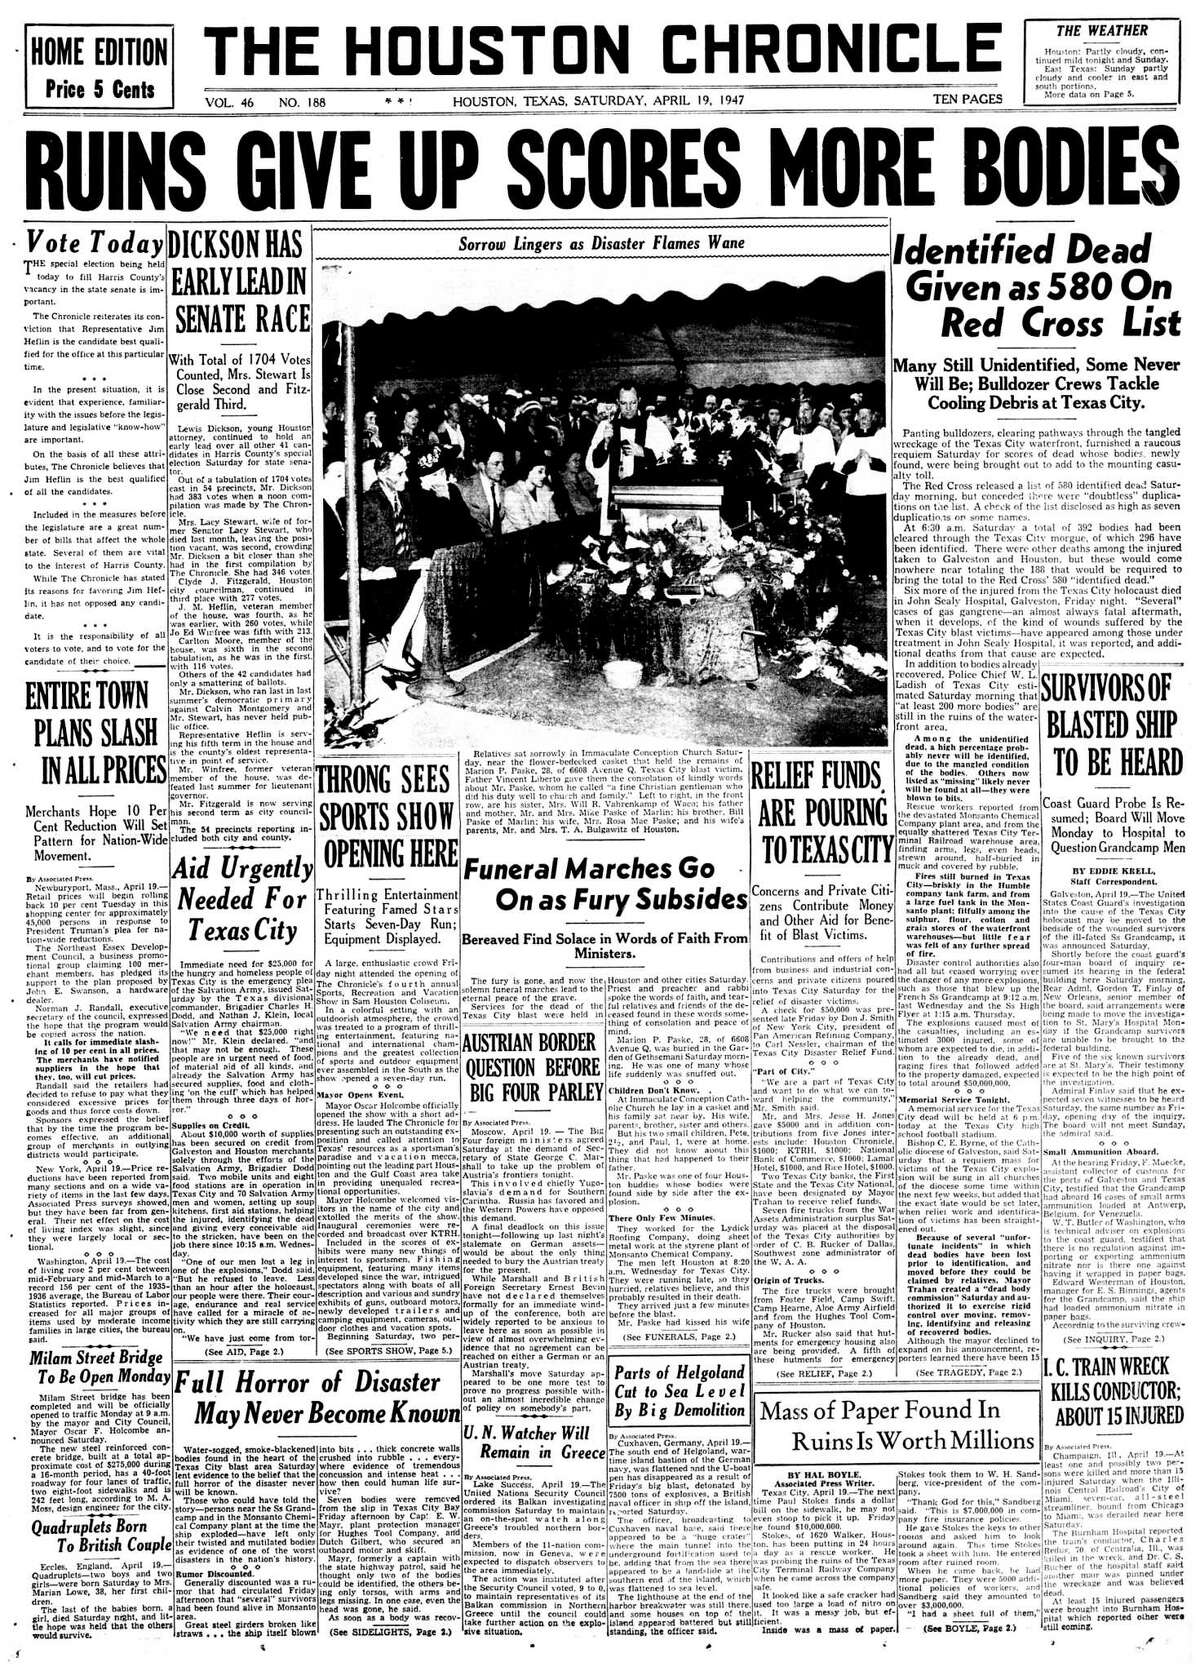 Houston Chronicle front page - April 19, 1947 - section 1, page 1. 